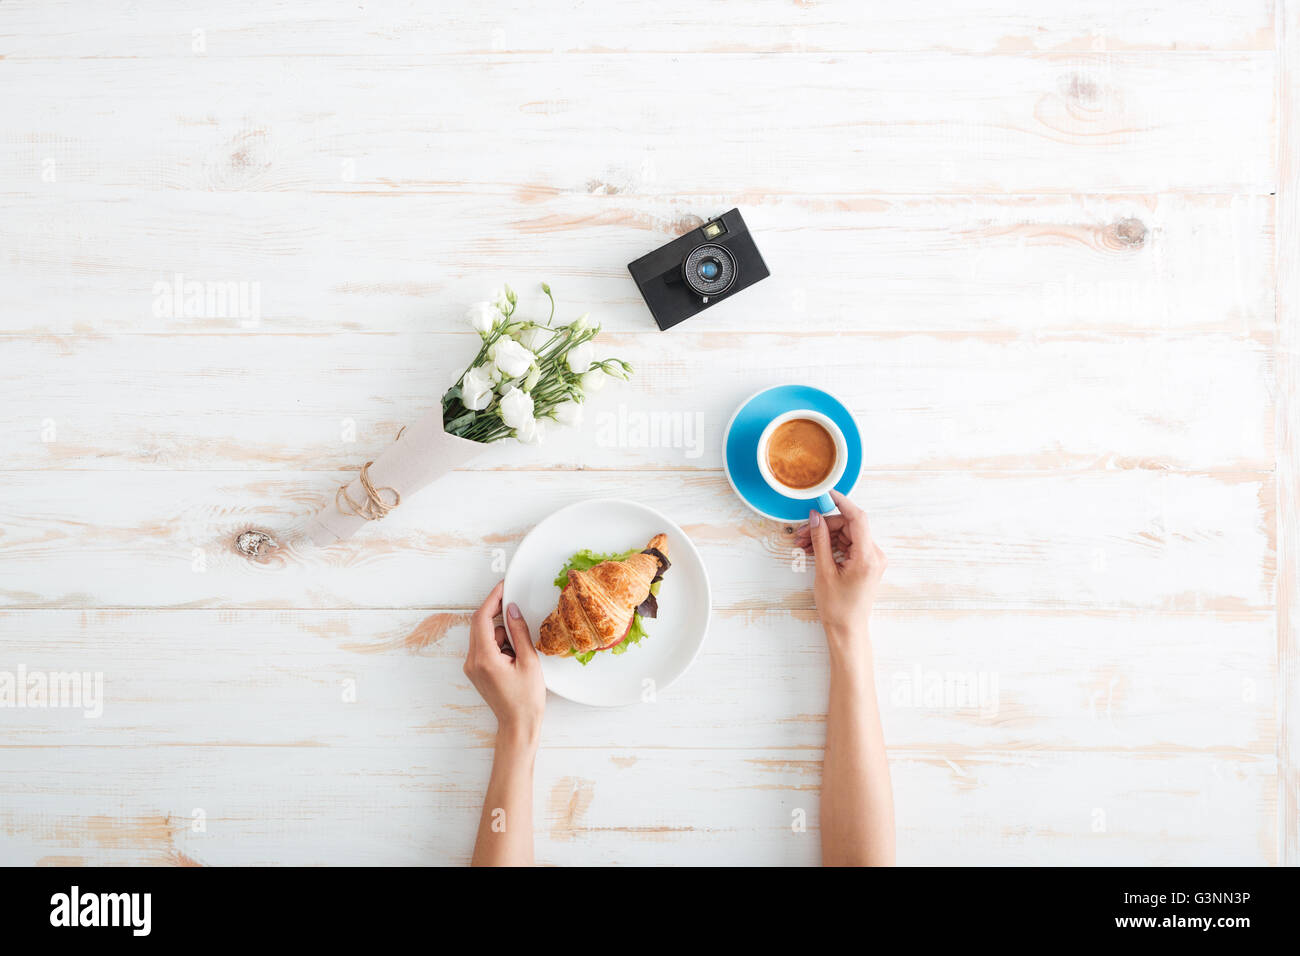 Hands of young woman drinking coffee with croissant on wooden table with flower bouquet and photo camera Stock Photo